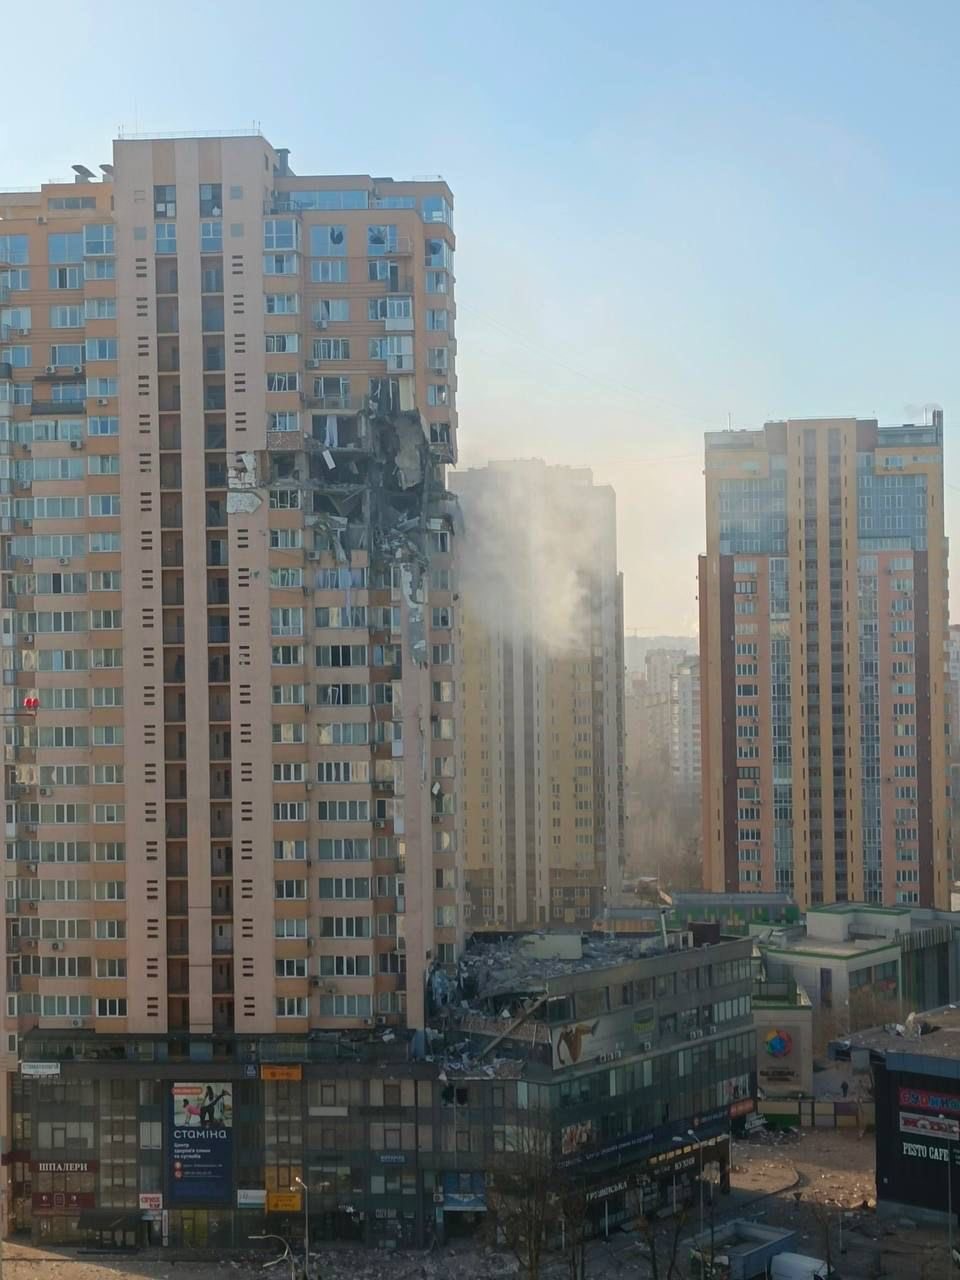 A residential block in the Ukrainian capital, Kyiv, hit by a missile.